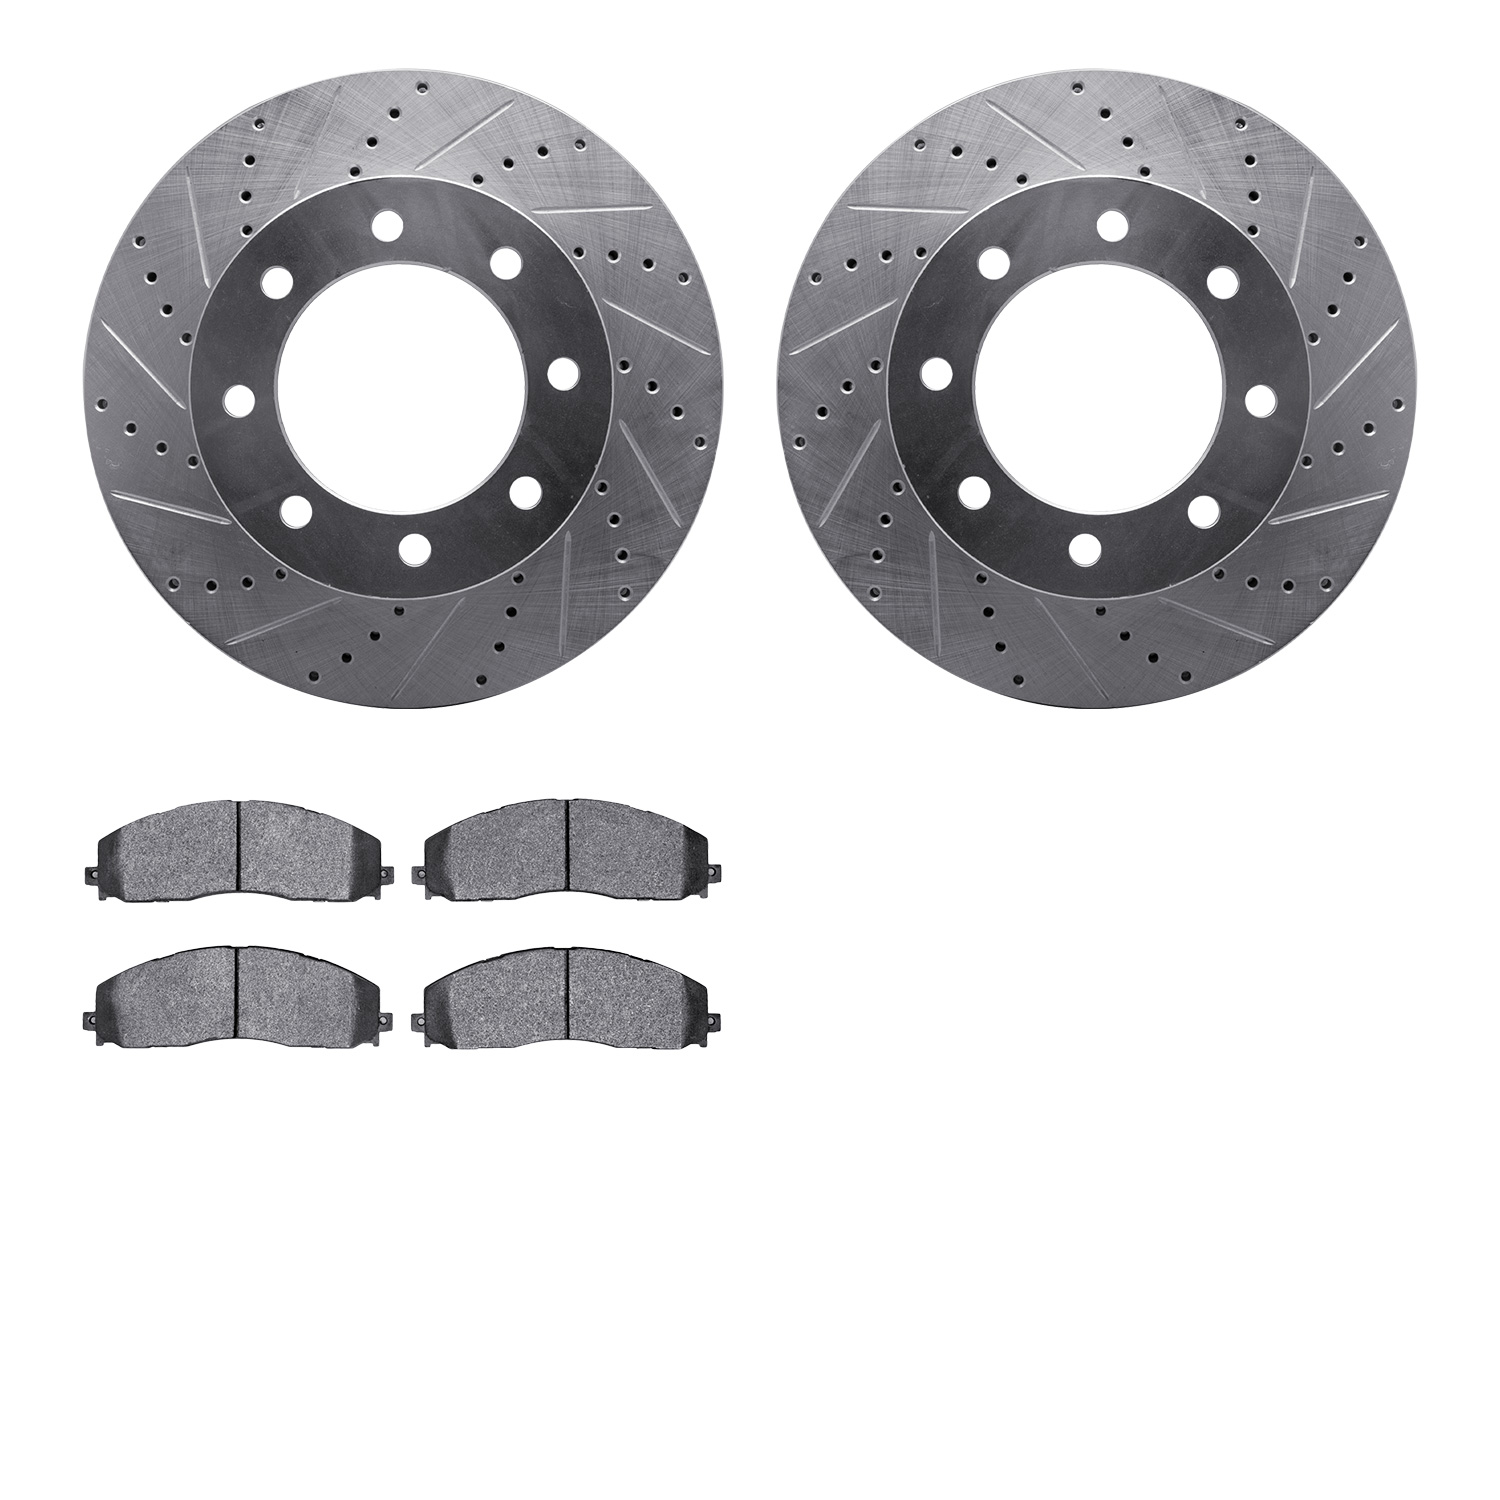 7402-54097 Drilled/Slotted Brake Rotors with Ultimate-Duty Brake Pads Kit [Silver], Fits Select Ford/Lincoln/Mercury/Mazda, Posi